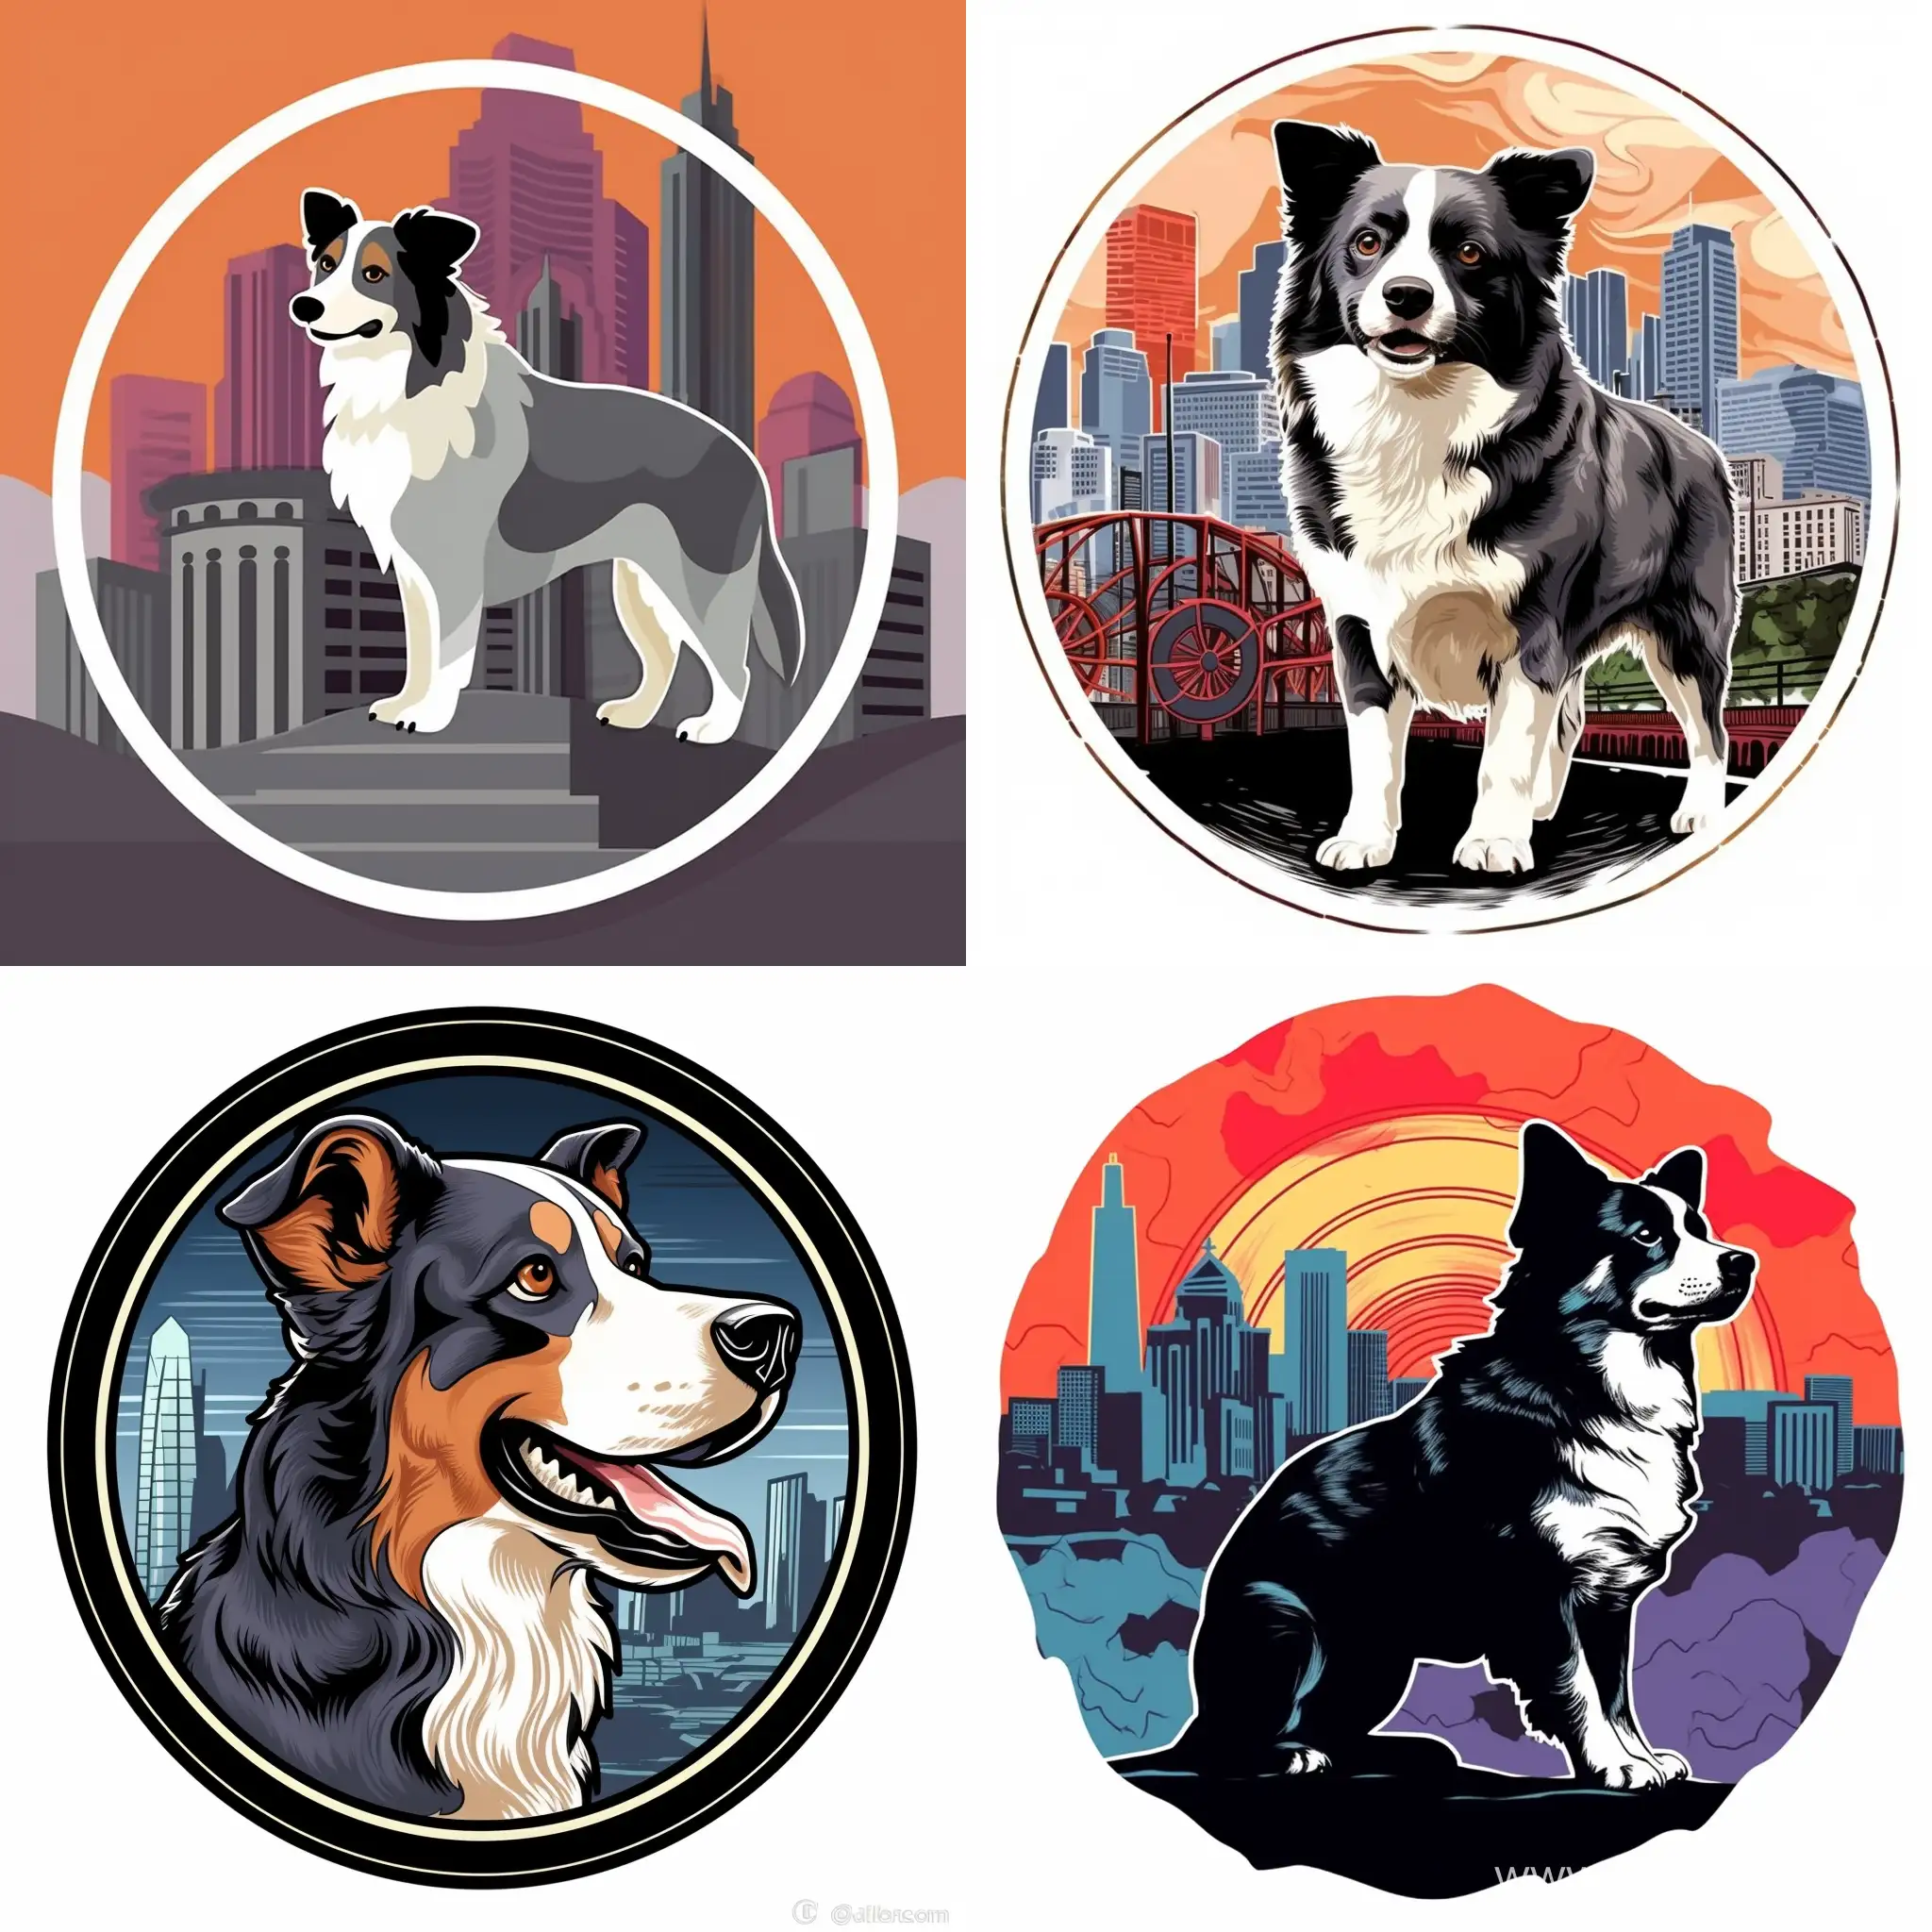 Urban-Corgi-Design-with-Street-Elements-in-Dark-Grays-Brick-Reds-and-Neon-Colors